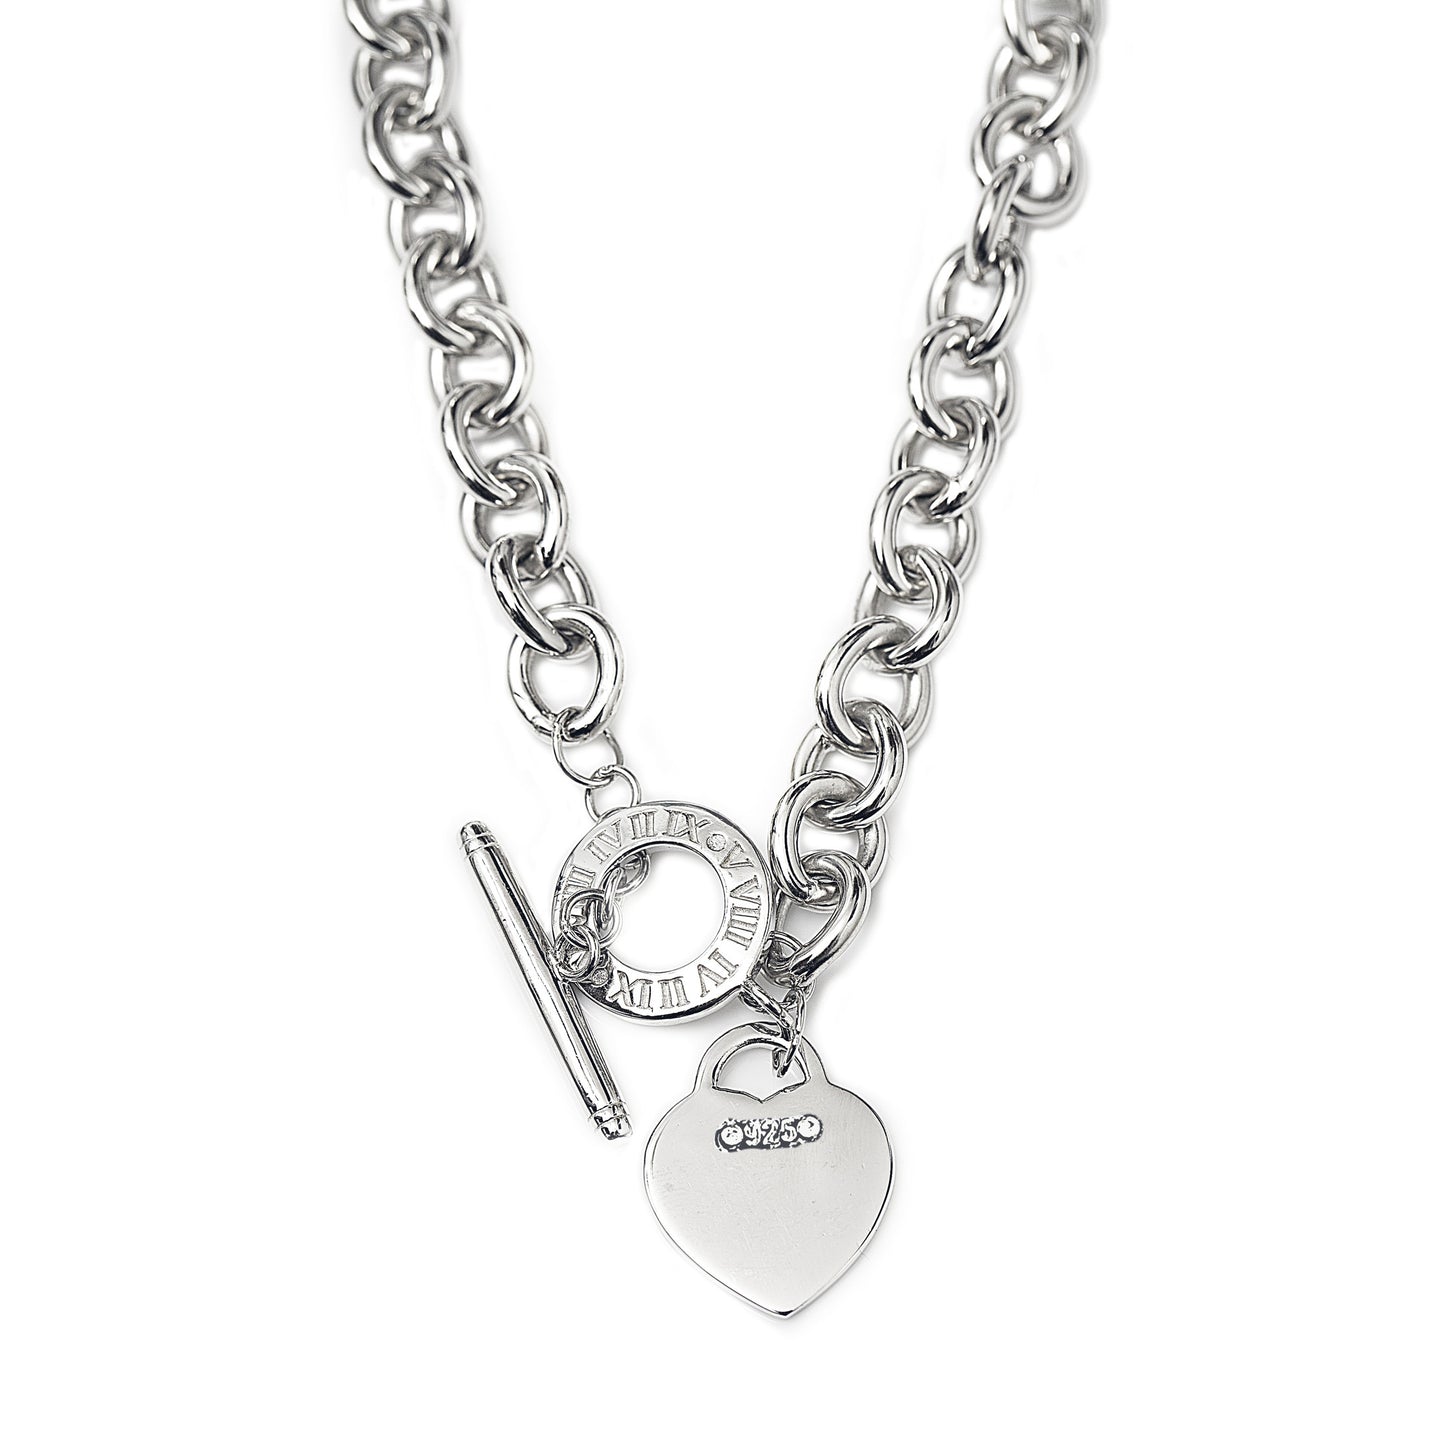 Amore Necklace in 925 Sterling Silver, classic thick belcher style necklace with a traditional FOB clasp and heart charm. Worldwide shipping plus FREE shipping within Australia. Affordable luxury jewellery by Bellagio & Co.